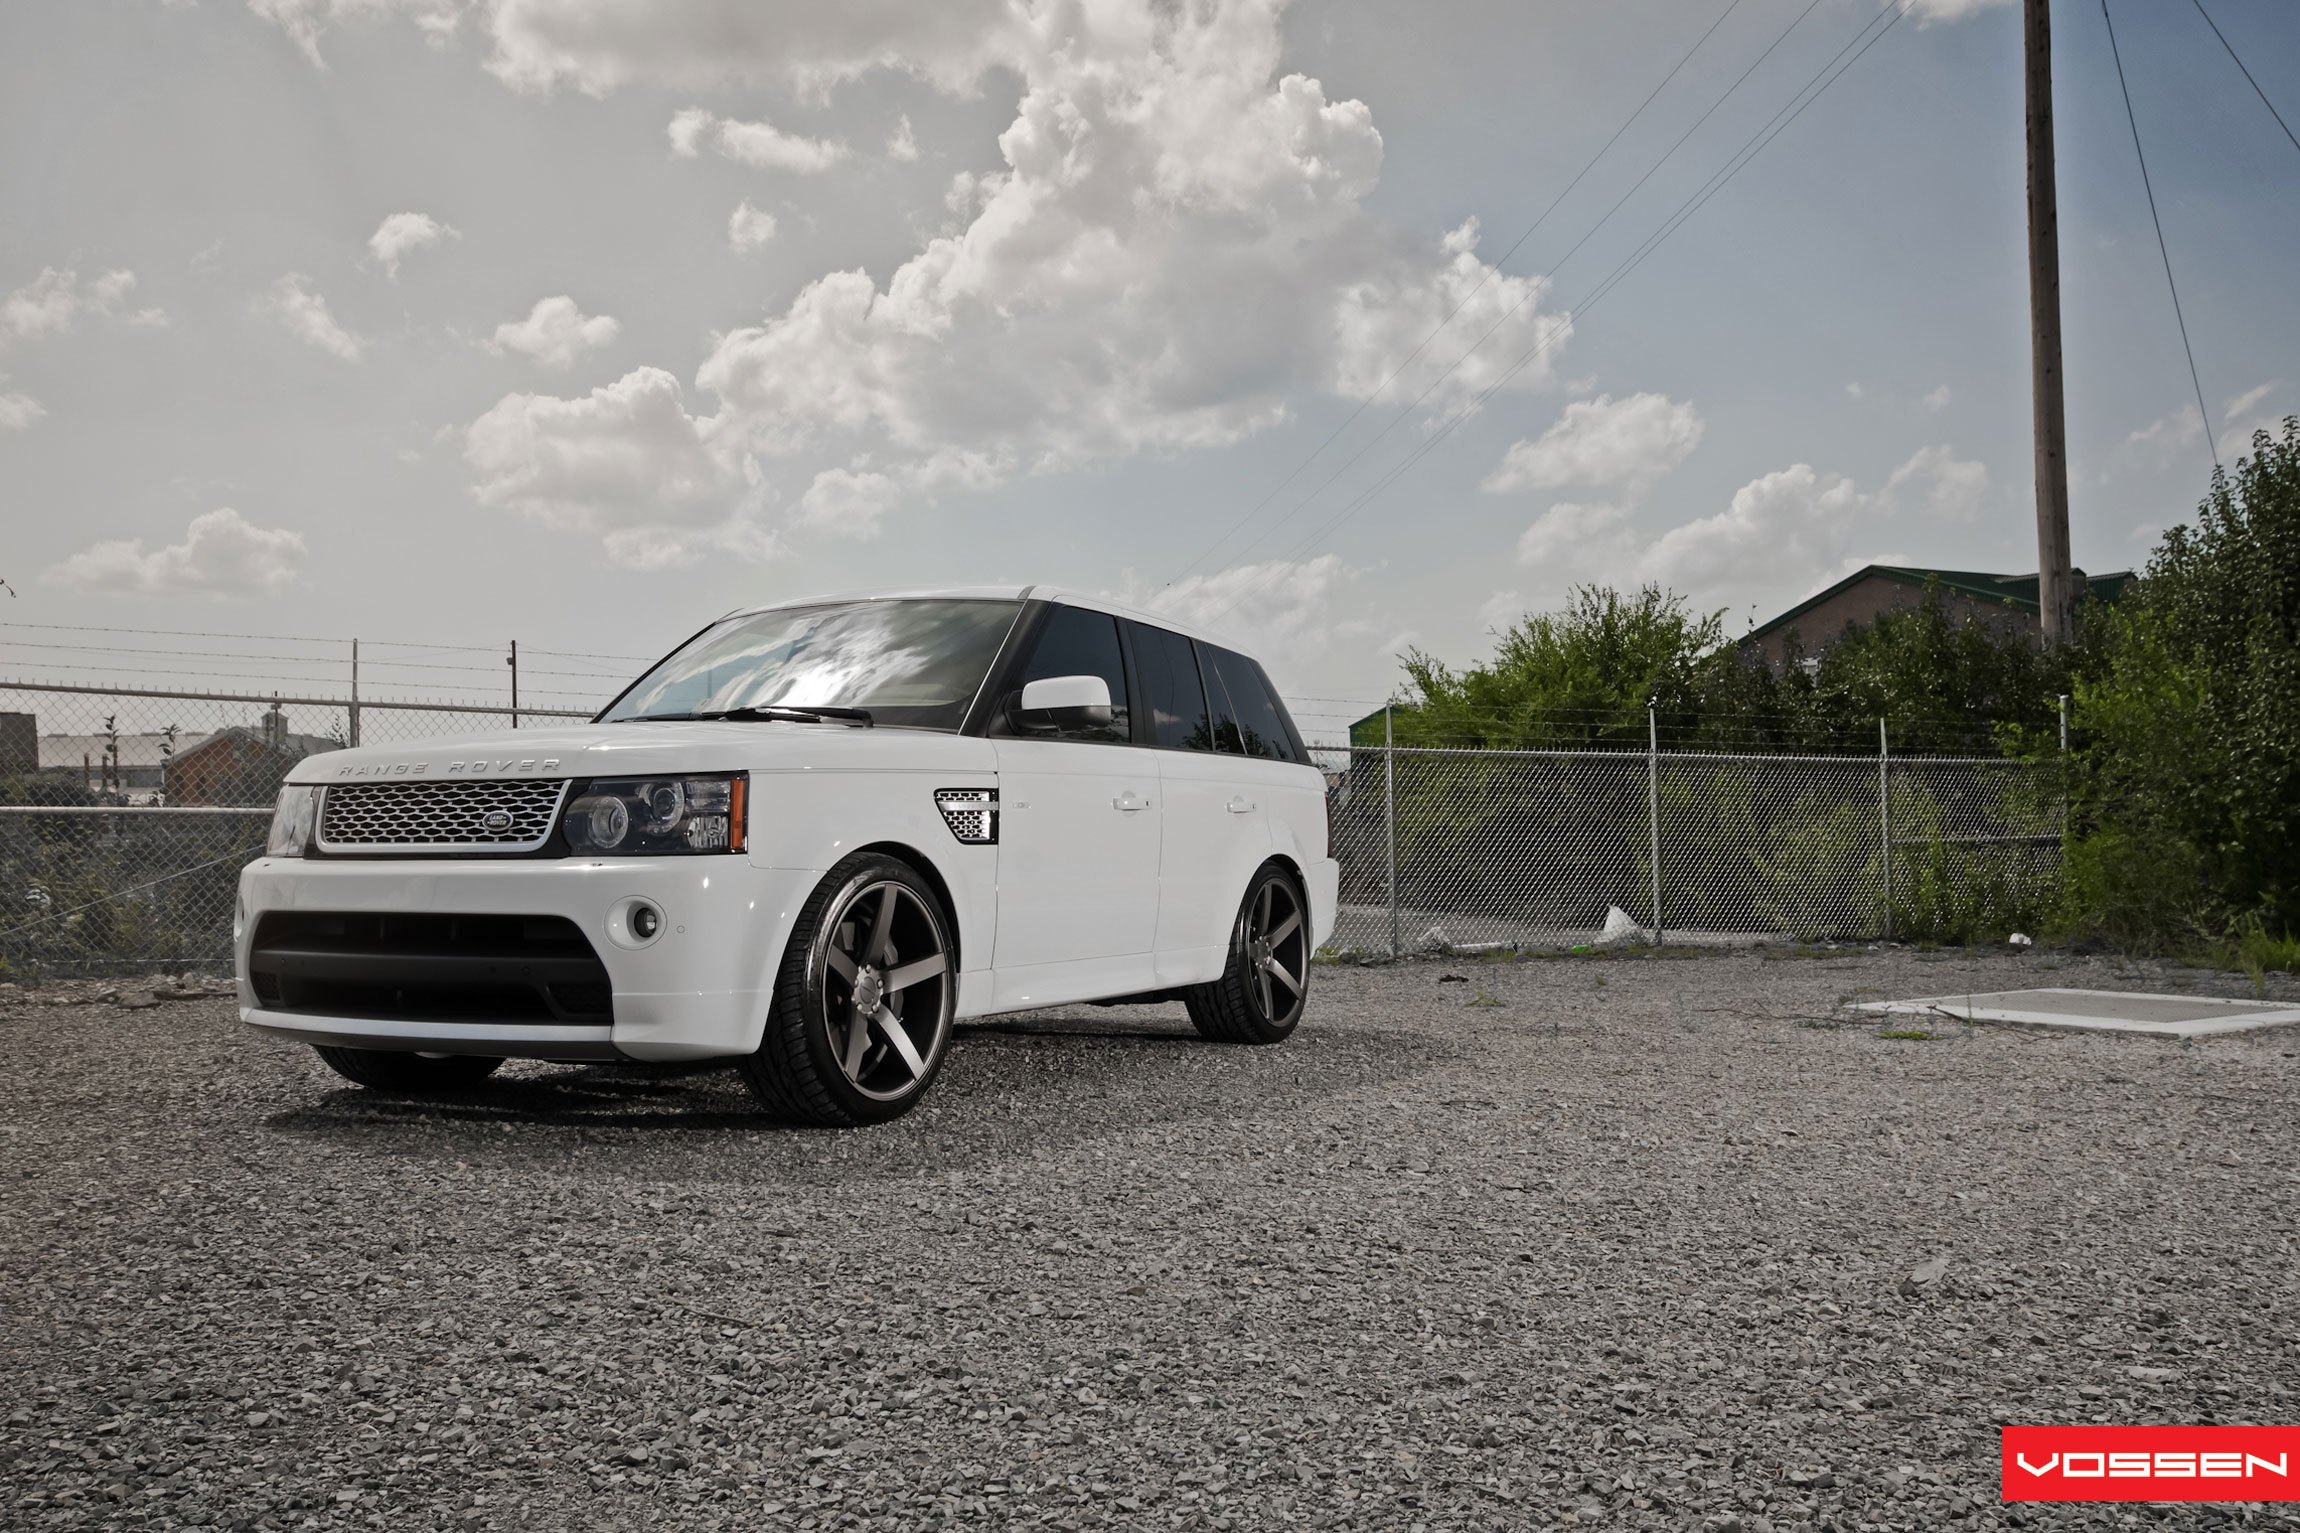 Chrome Bumper Air Ducts on White Land Rover Sport - Photo by Vossen